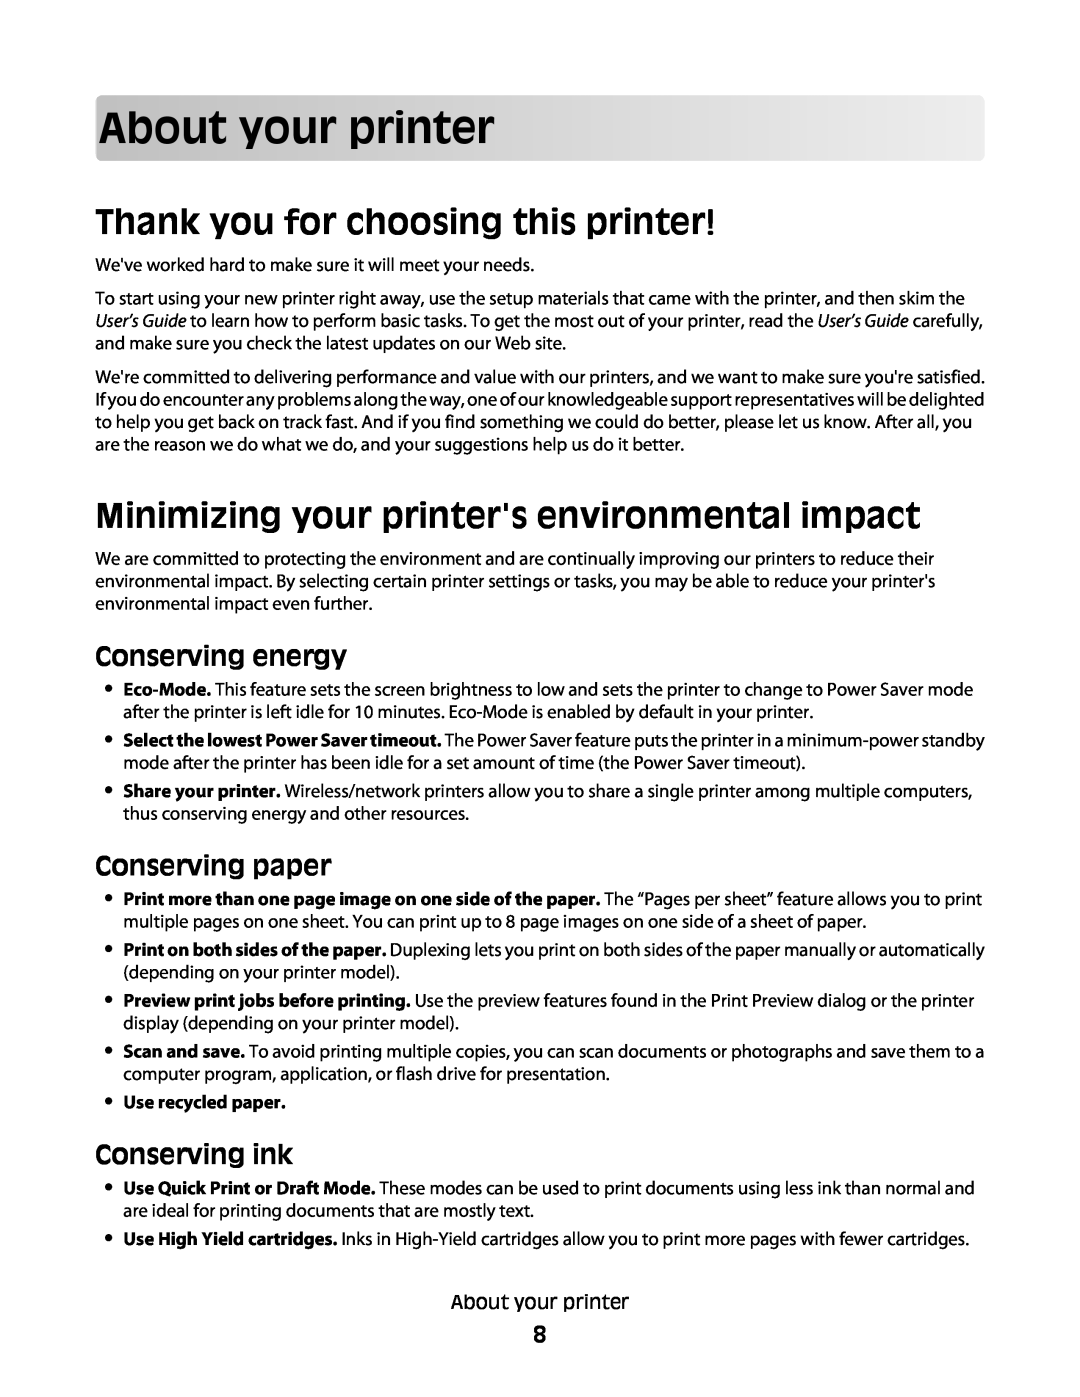 Dell V515W manual About your printer, Thank you for choosing this printer, Minimizing your printers environmental impact 